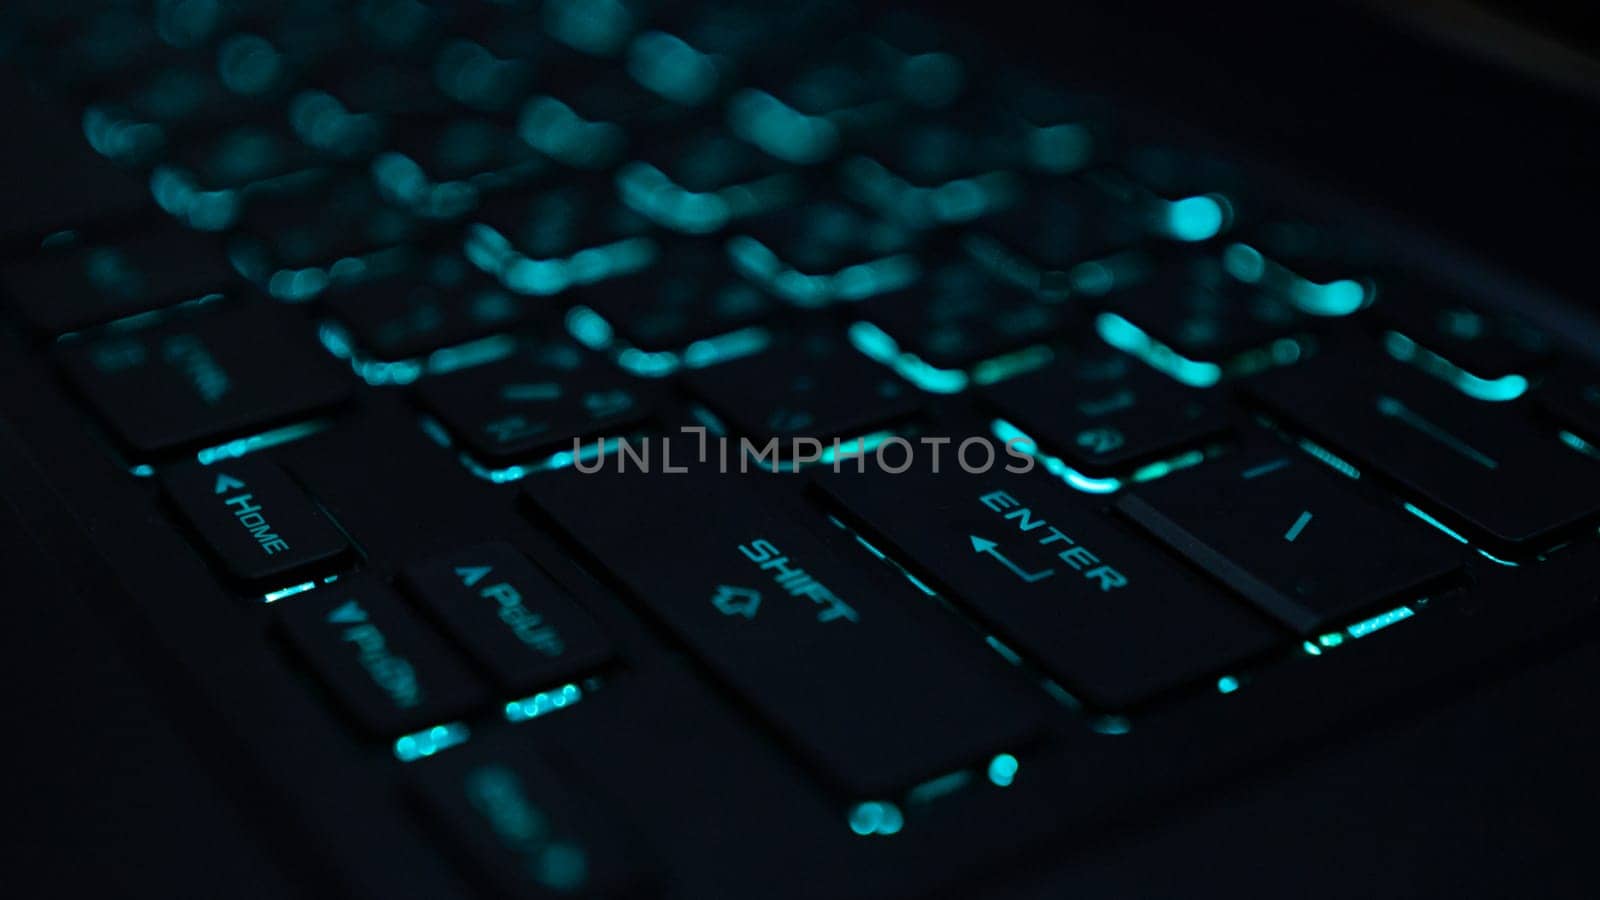 A computer keyboard is an input device that allows a person to enter letters, numbers, and other symbols keyboard with green back-light